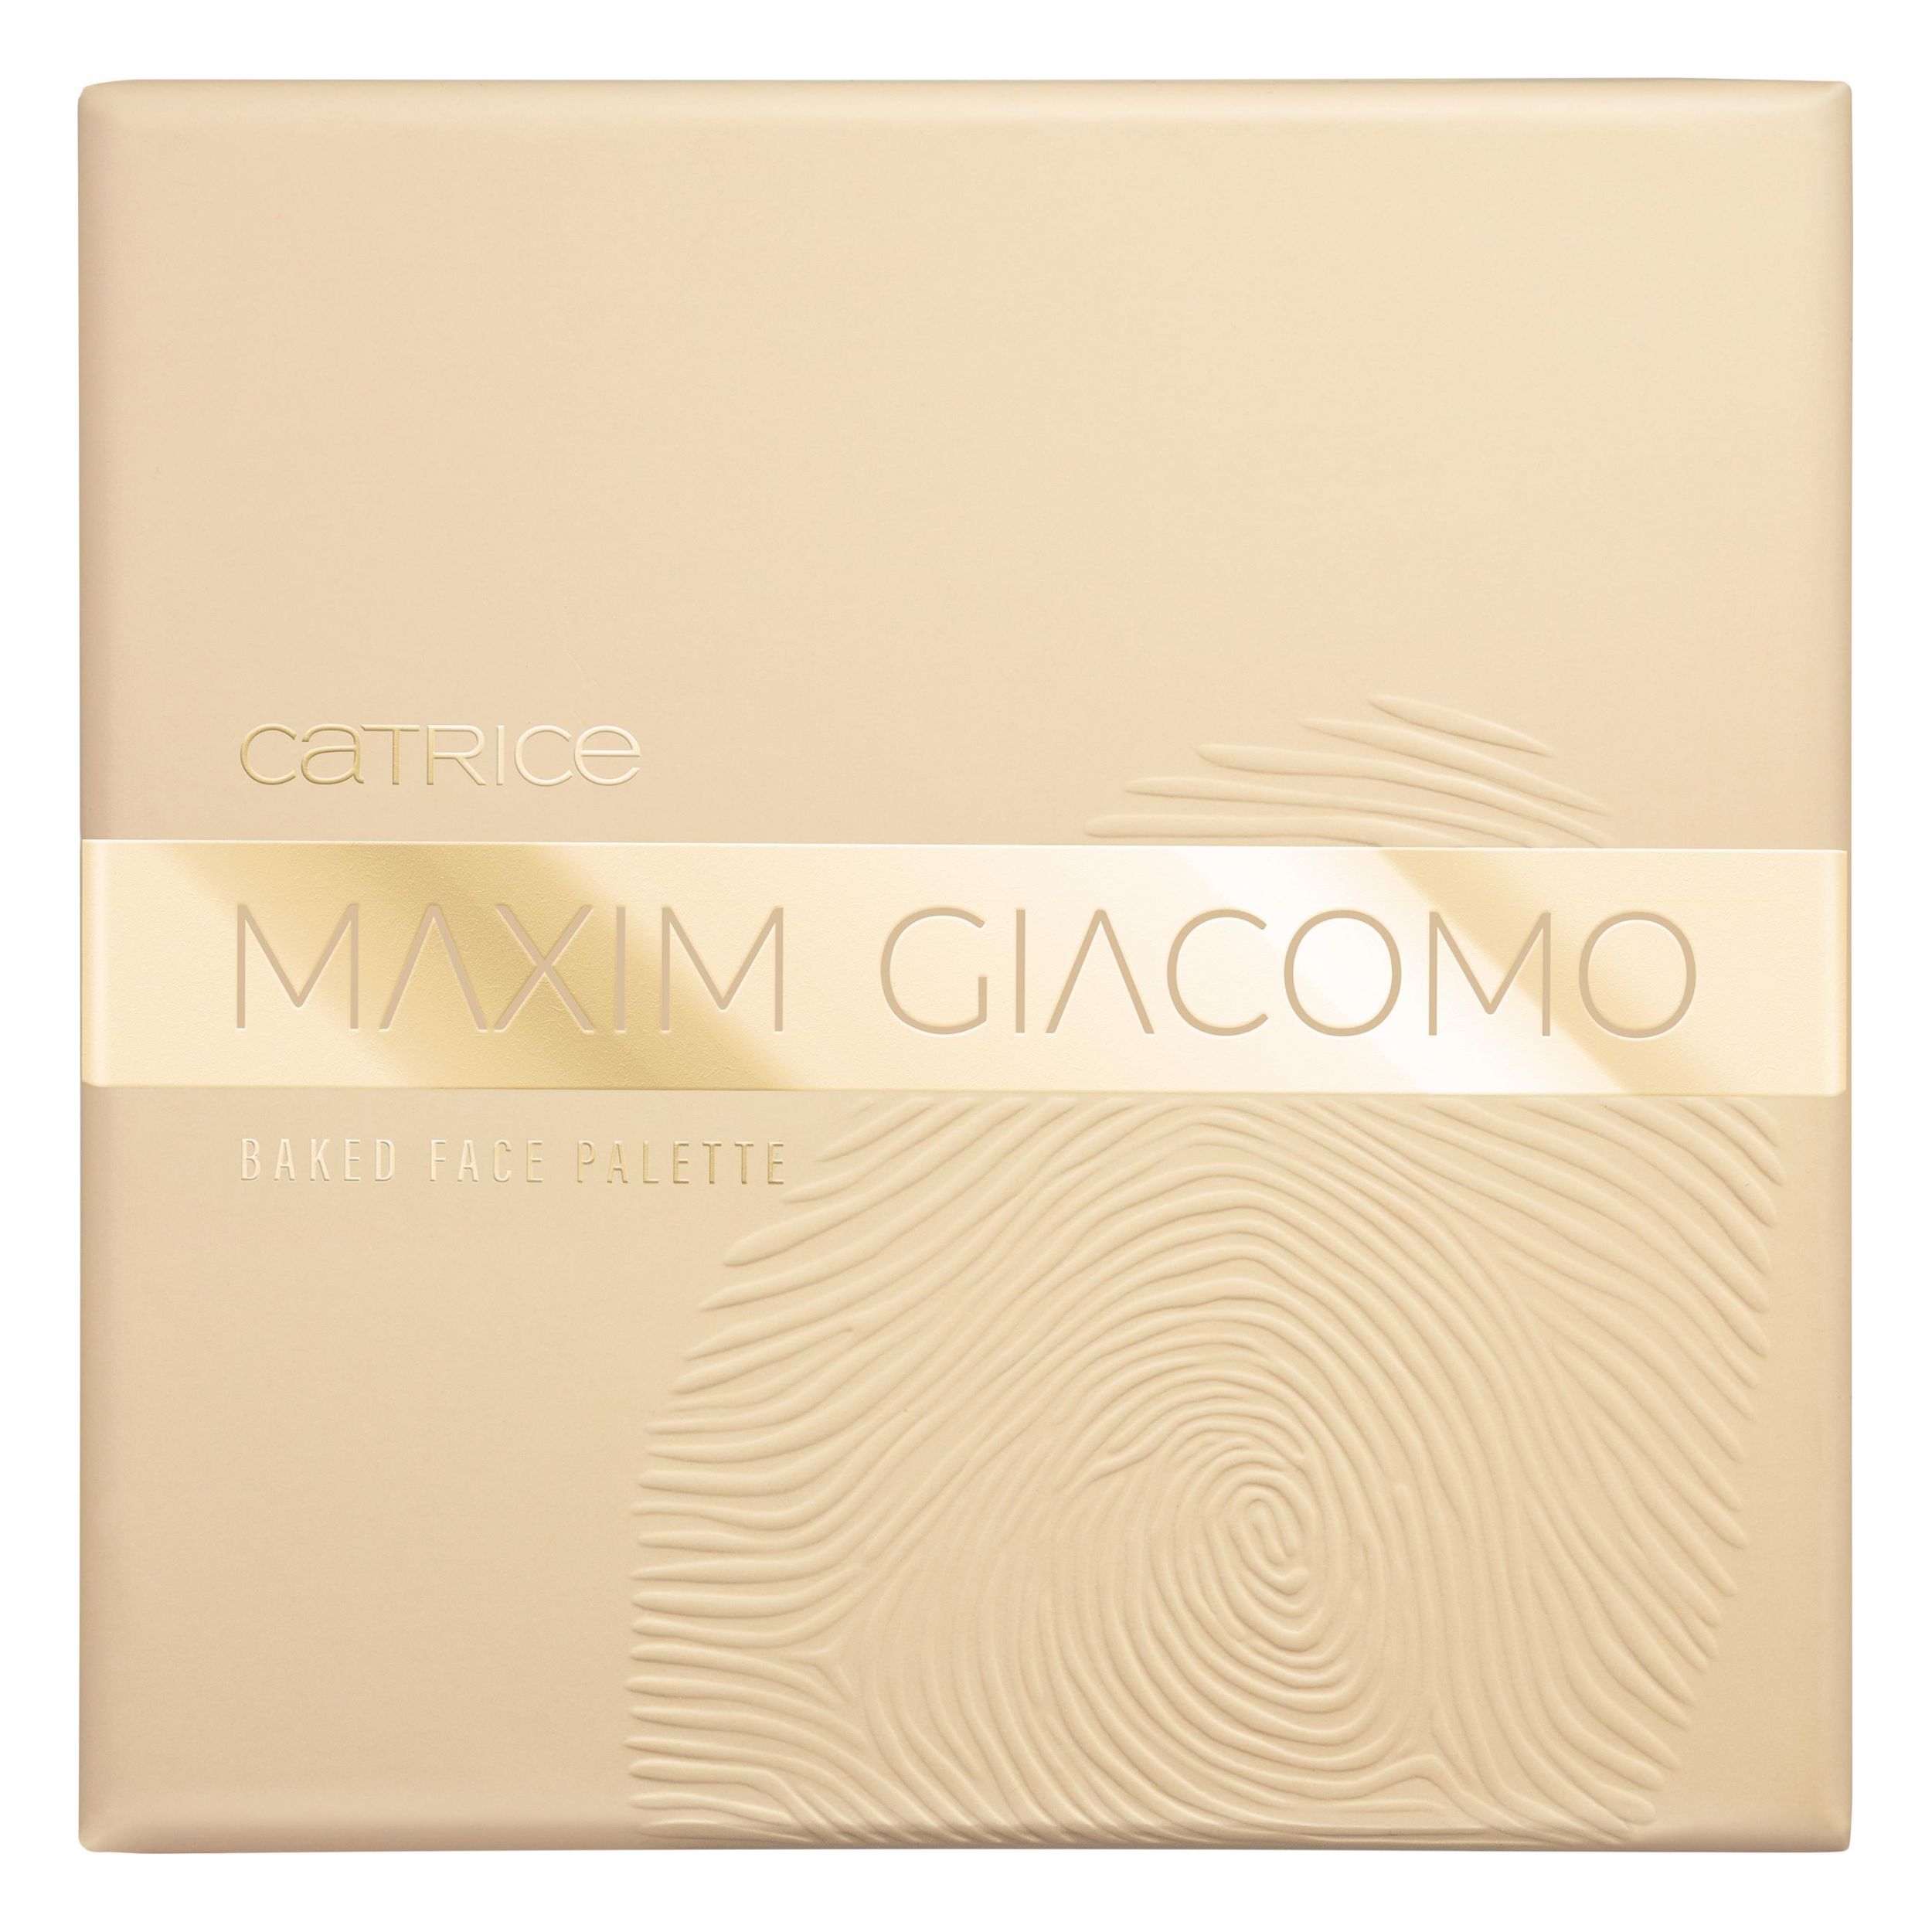 Maxim Giacomo In Colours Baked Face Palette